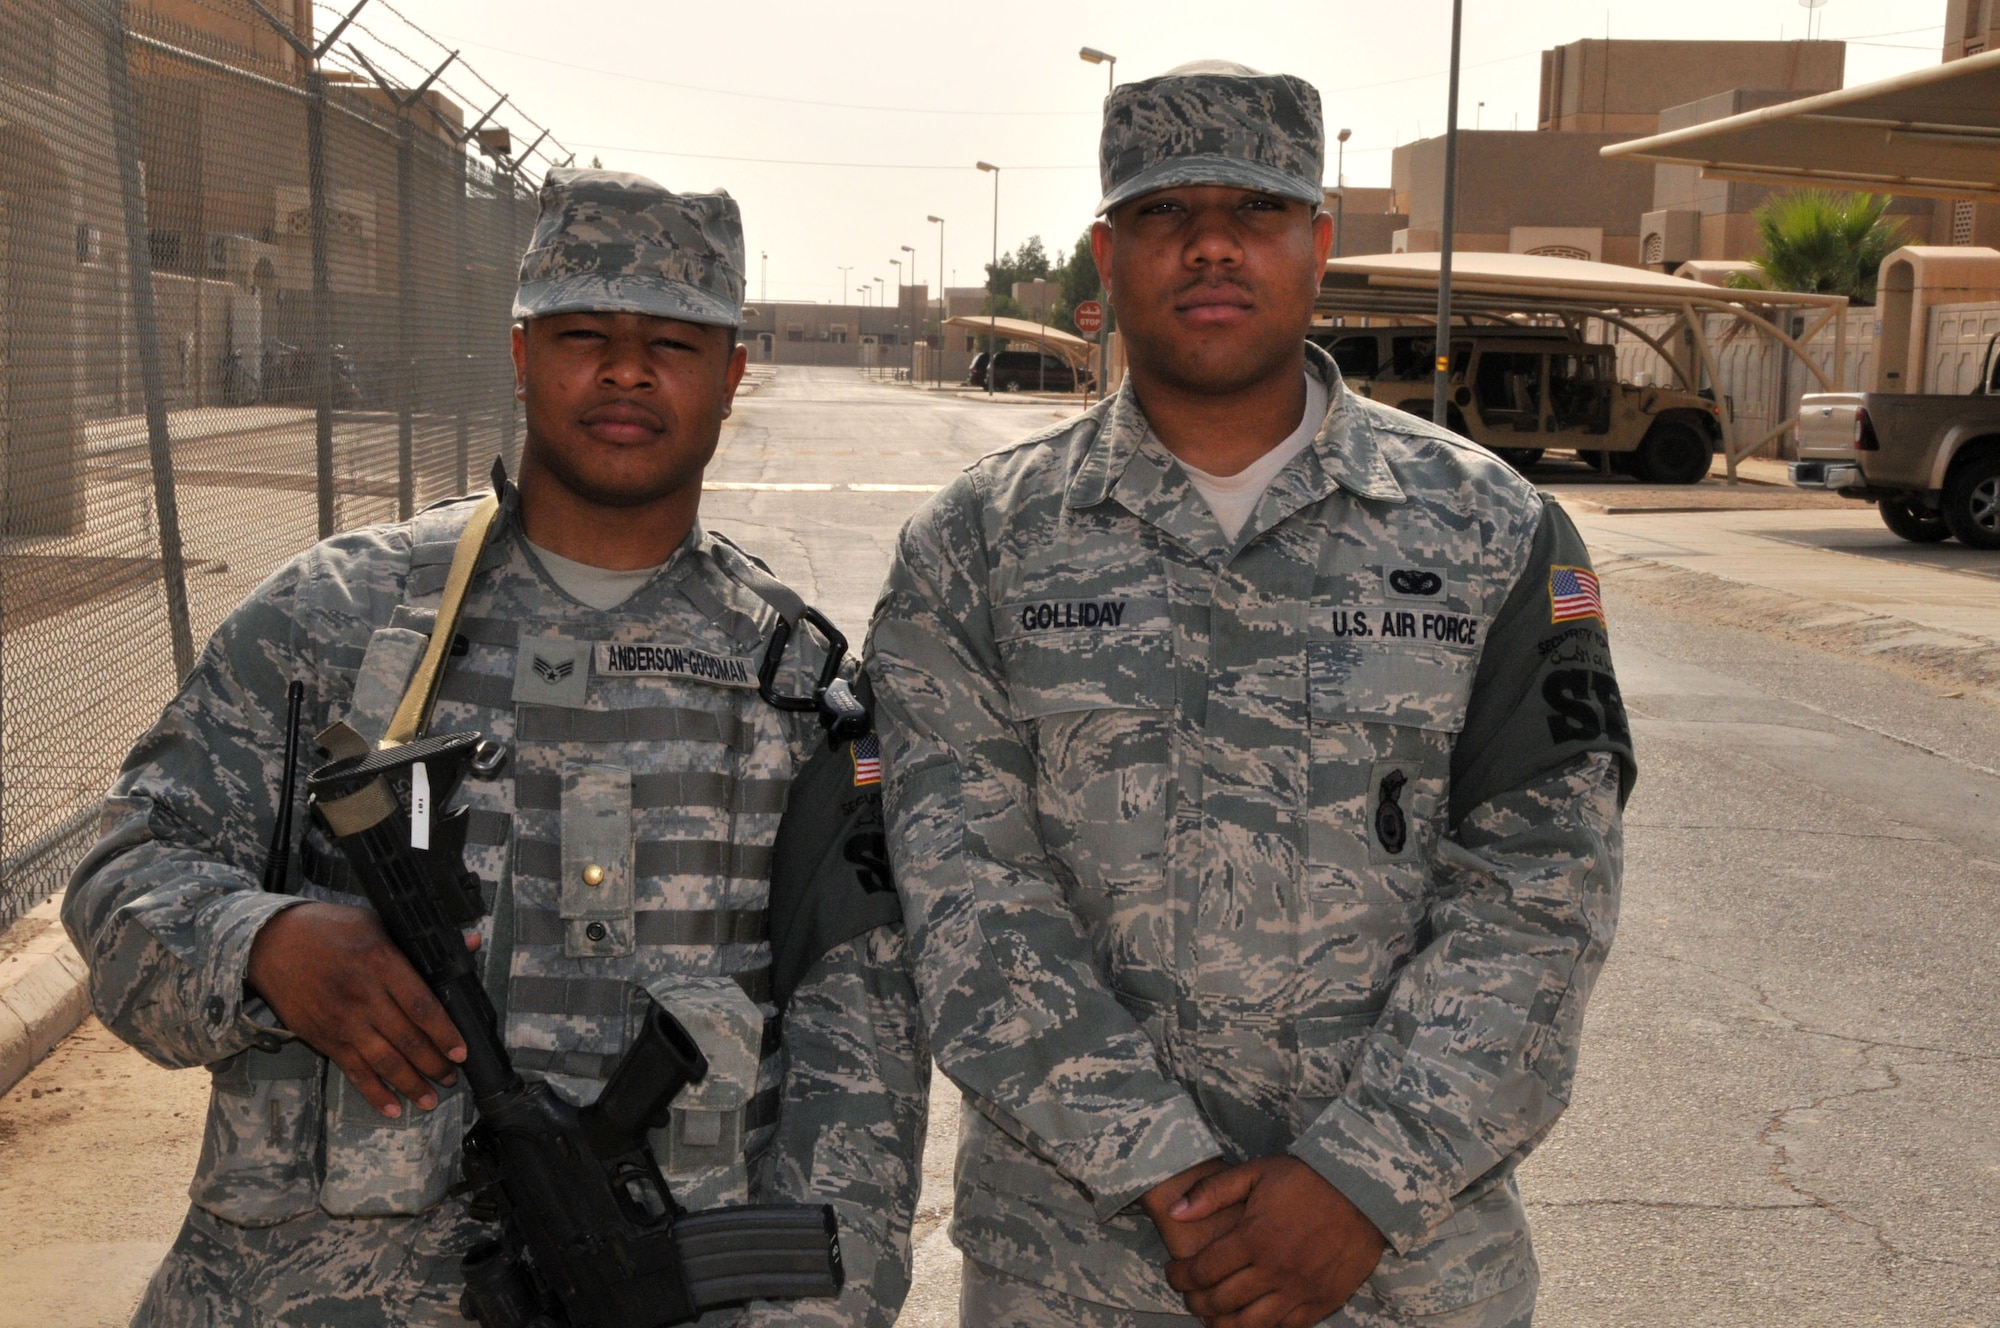 Senior Airman Charles Anderson-Goodman and Airman 1st Class Reginald Golliday on duty in Southwest Asia. The Airmen voluntarily deployed less than three months after facing a gunman’s bullets during the attack on a military bus at the Frankfurt airport in Germany. Both are deployed to the 64th Air Expeditionary Group from the 48th Security Forces Squadron at Royal Air Force Lakenheath, England. (U.S. Air Force photo/Master Sgt. Mike Hammond)